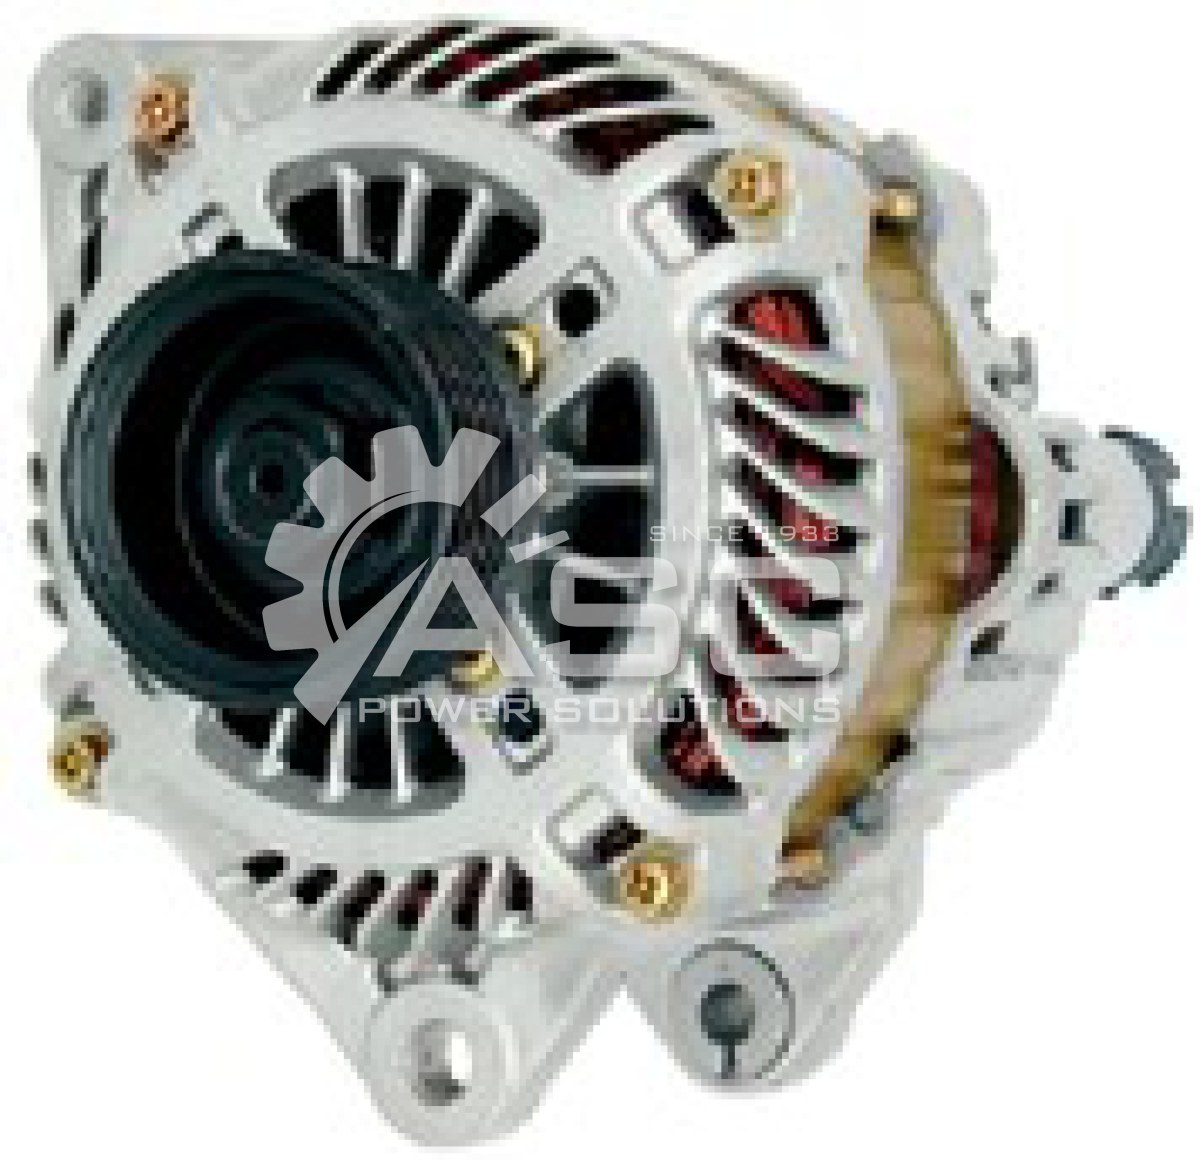 A481422N_NEW ASC POWER SOLUTIONS AFTERMARKET MITSUBISHI ALTERNATOR 12V 110A FOR INFINITI & NISSAN